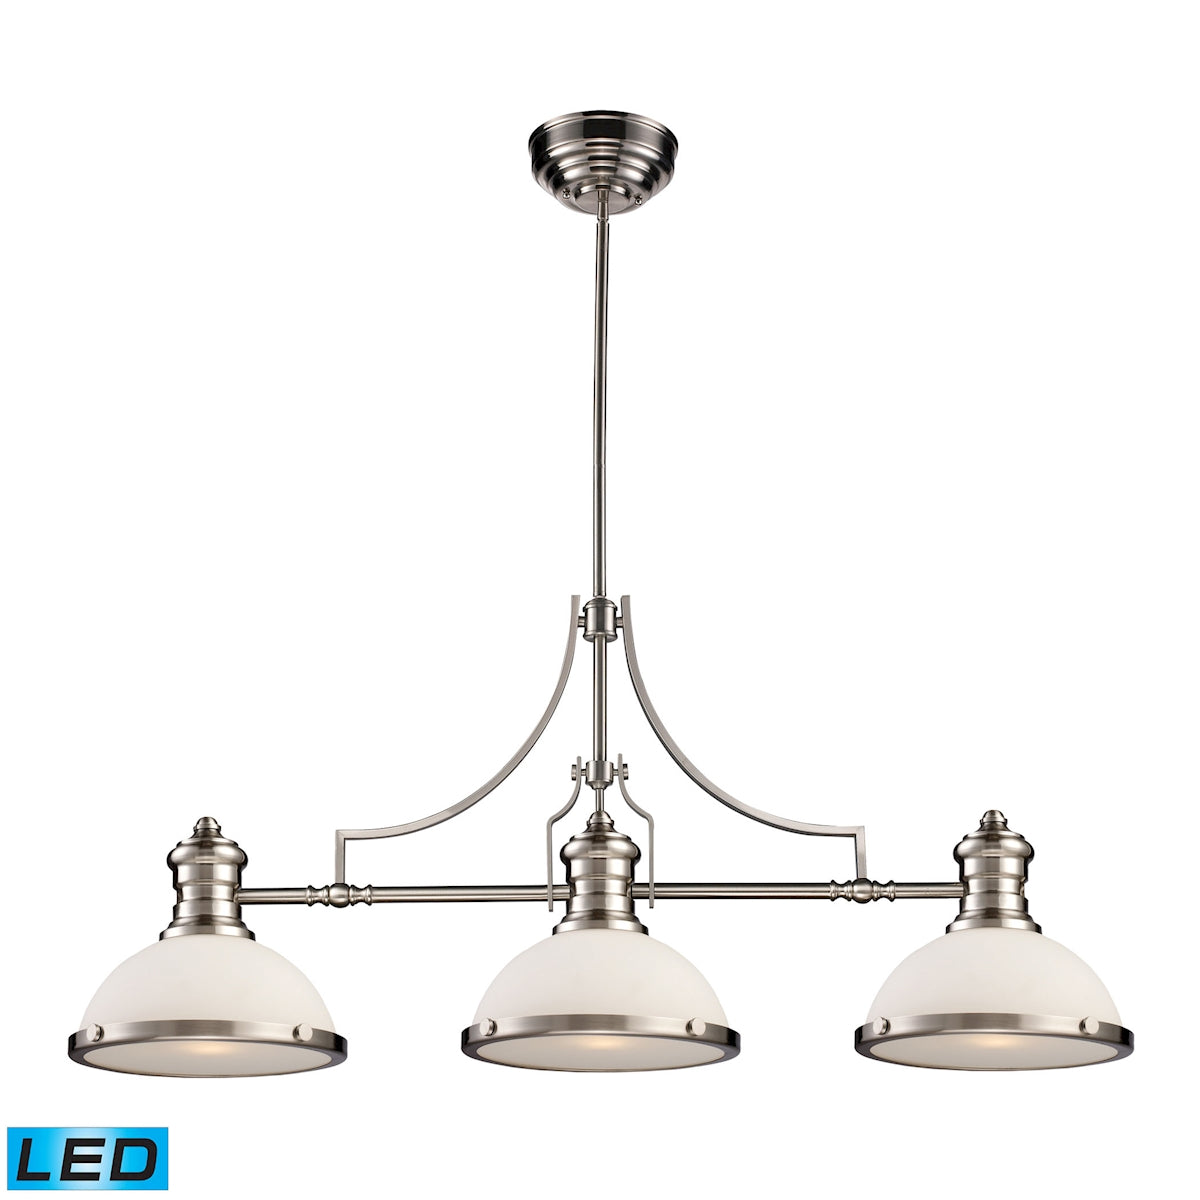 ELK Lighting 66225-3-LED Chadwick 3-Light Island Light in Satin Nickel with Gloss White Shade - Includes LED Bulbs